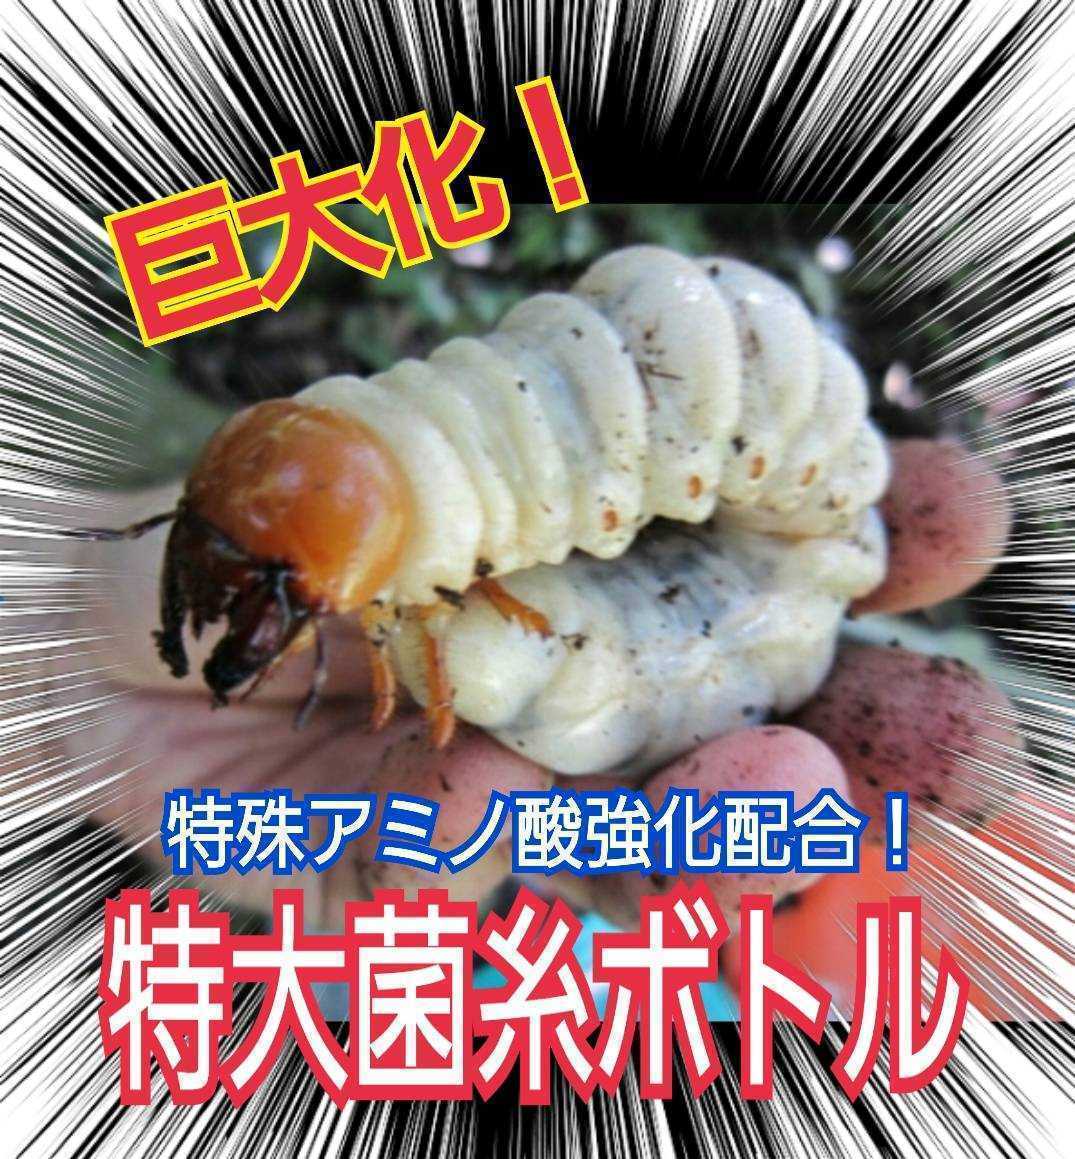  stag beetle larva . huge .! finest quality!himalaya common ... thread bin *1500ml[ 2 ps ] special amino acid strengthen combination prejudice. most . only . making! Guinness class ream departure 